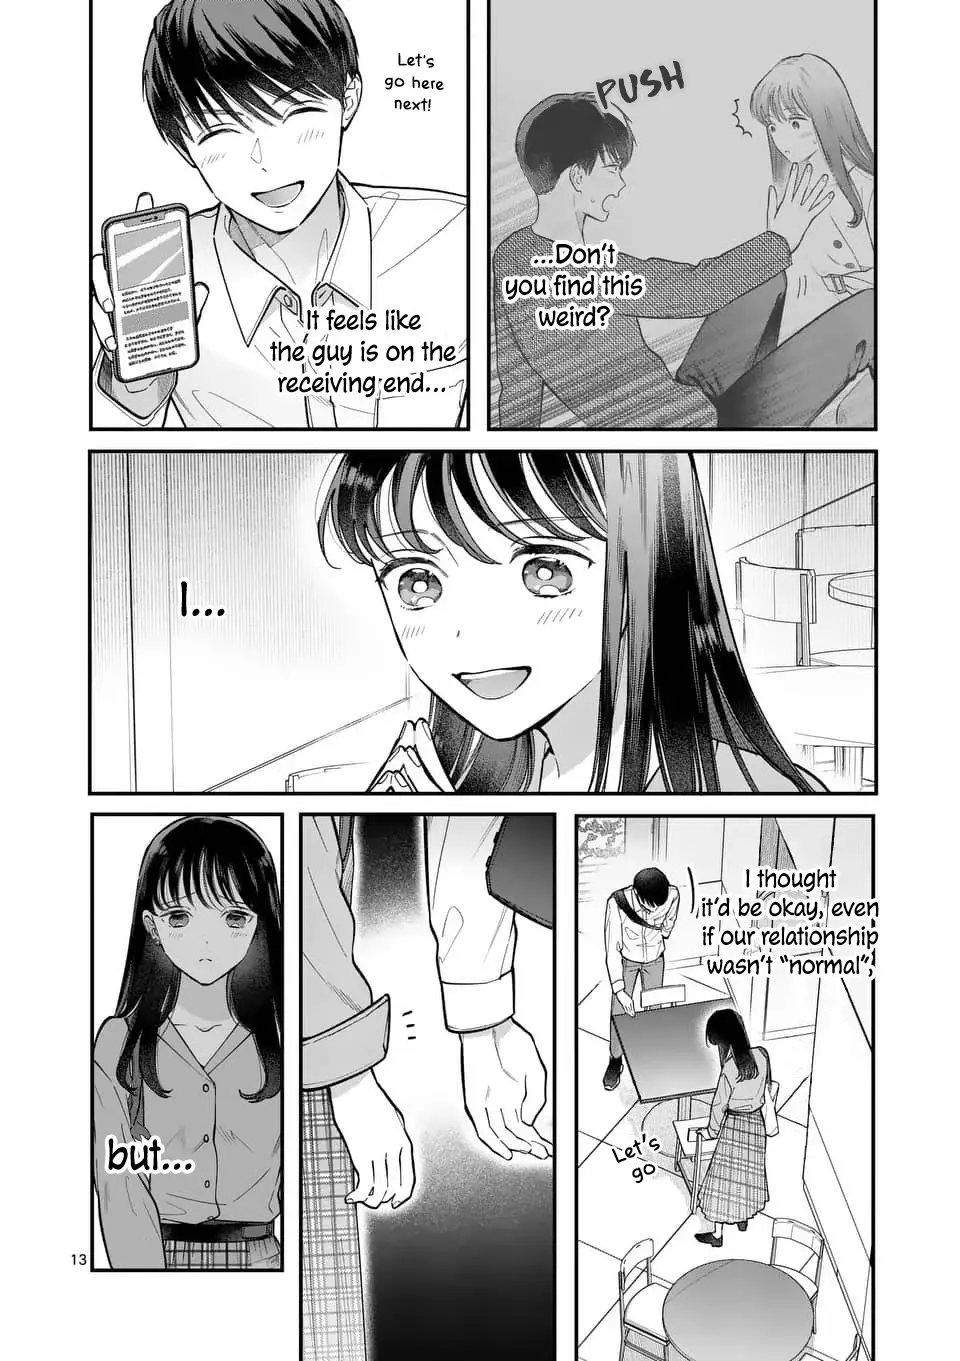 Is It Wrong To Get Done By A Girl? - 3 page 13